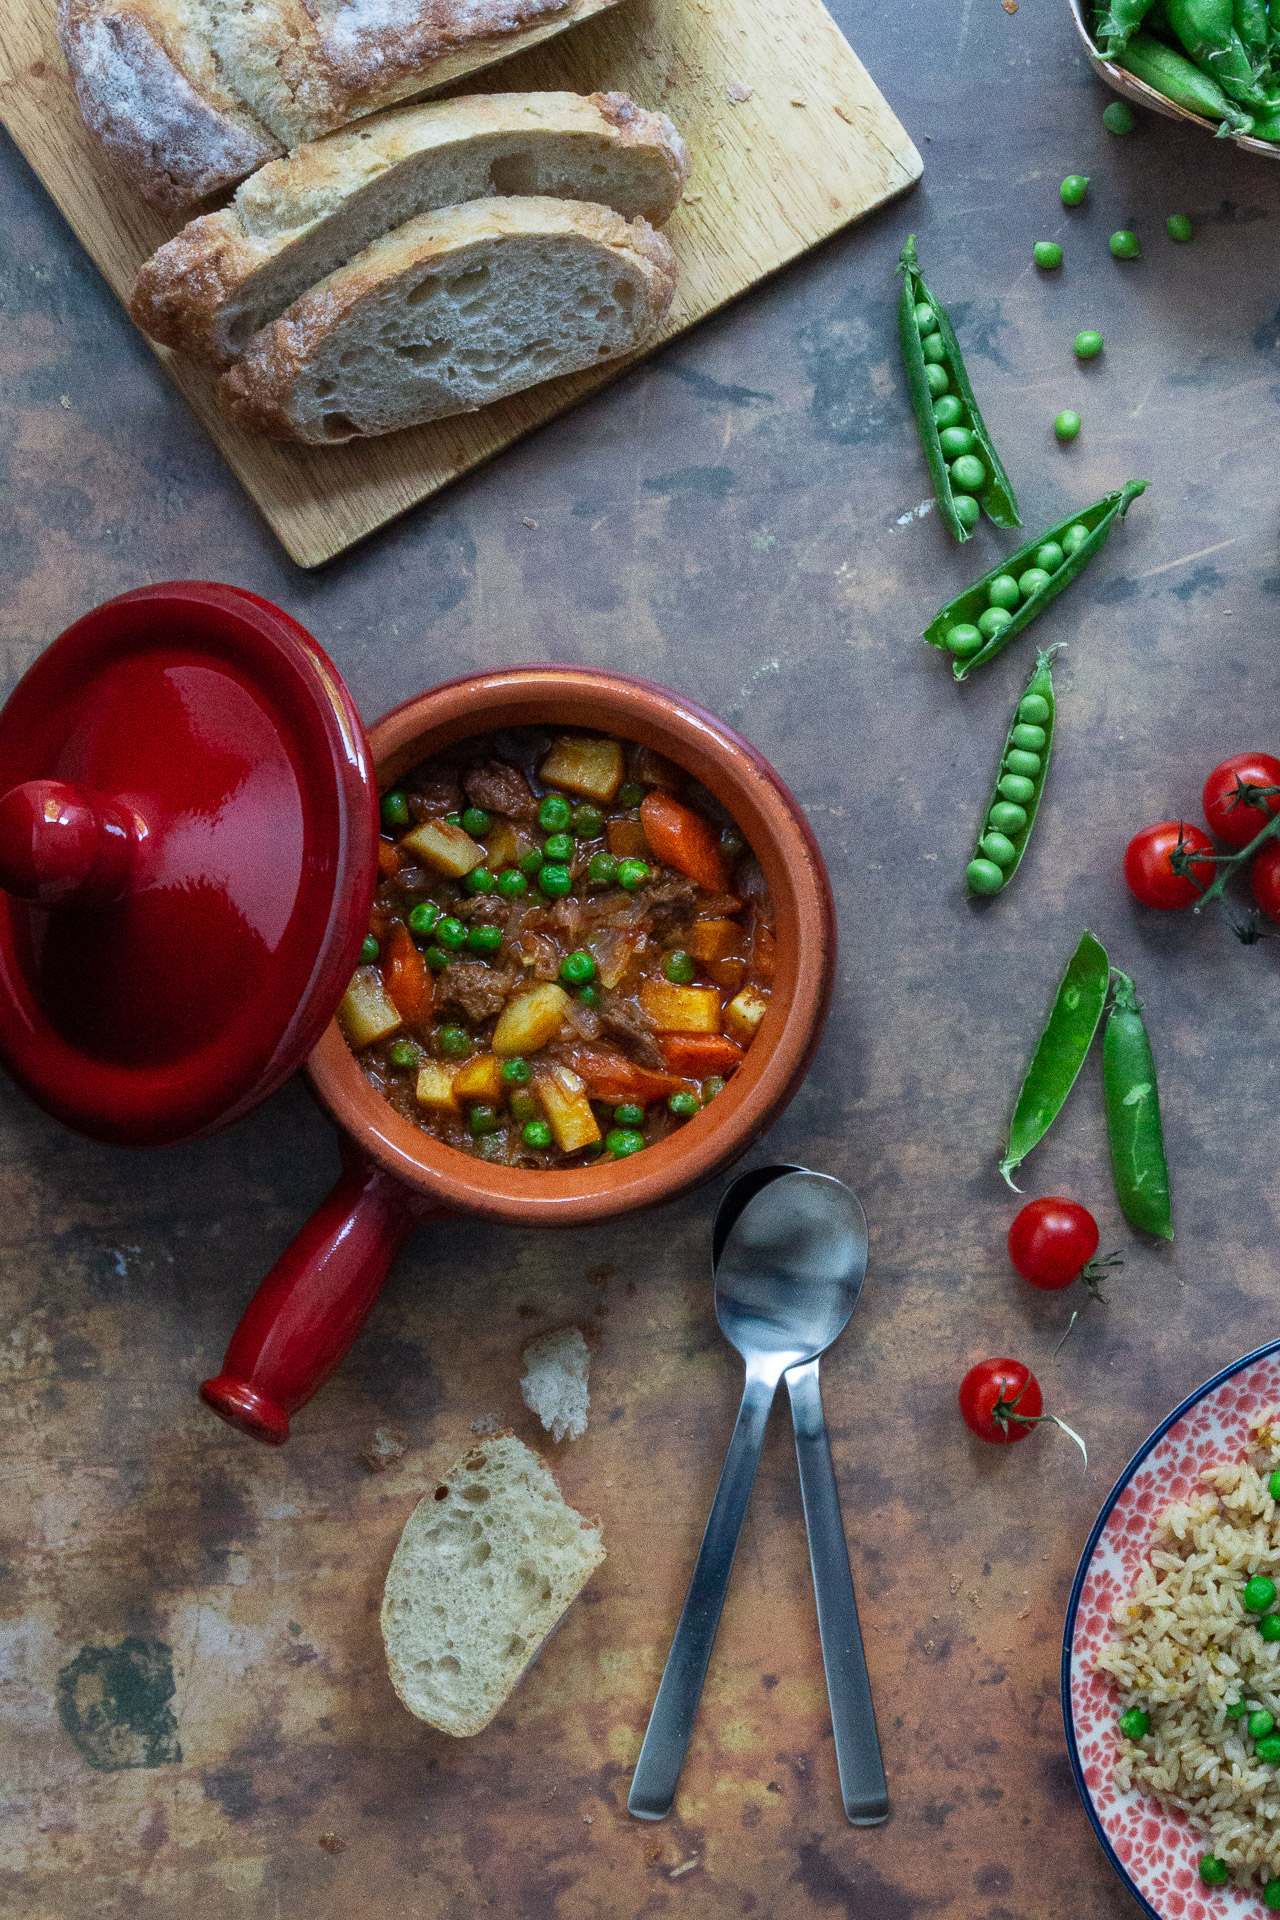 A hearty beef stew with peas, carrots and potatoes